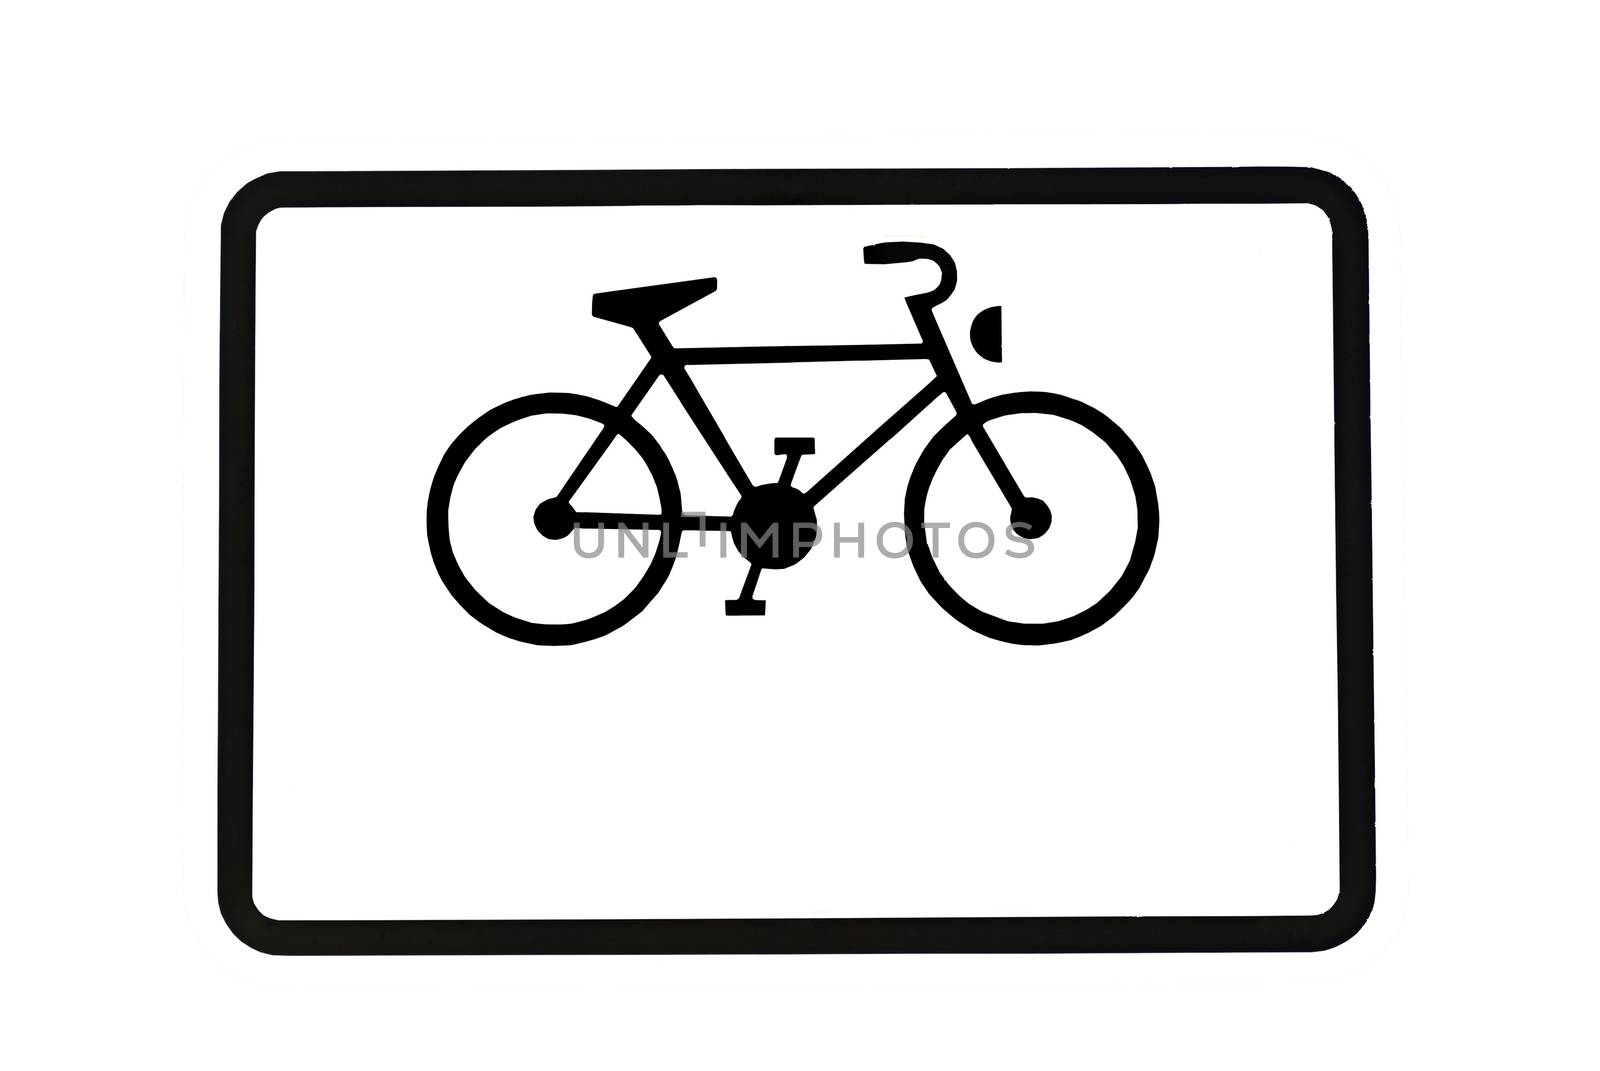 A bicycle on a traffic sign. Optional.